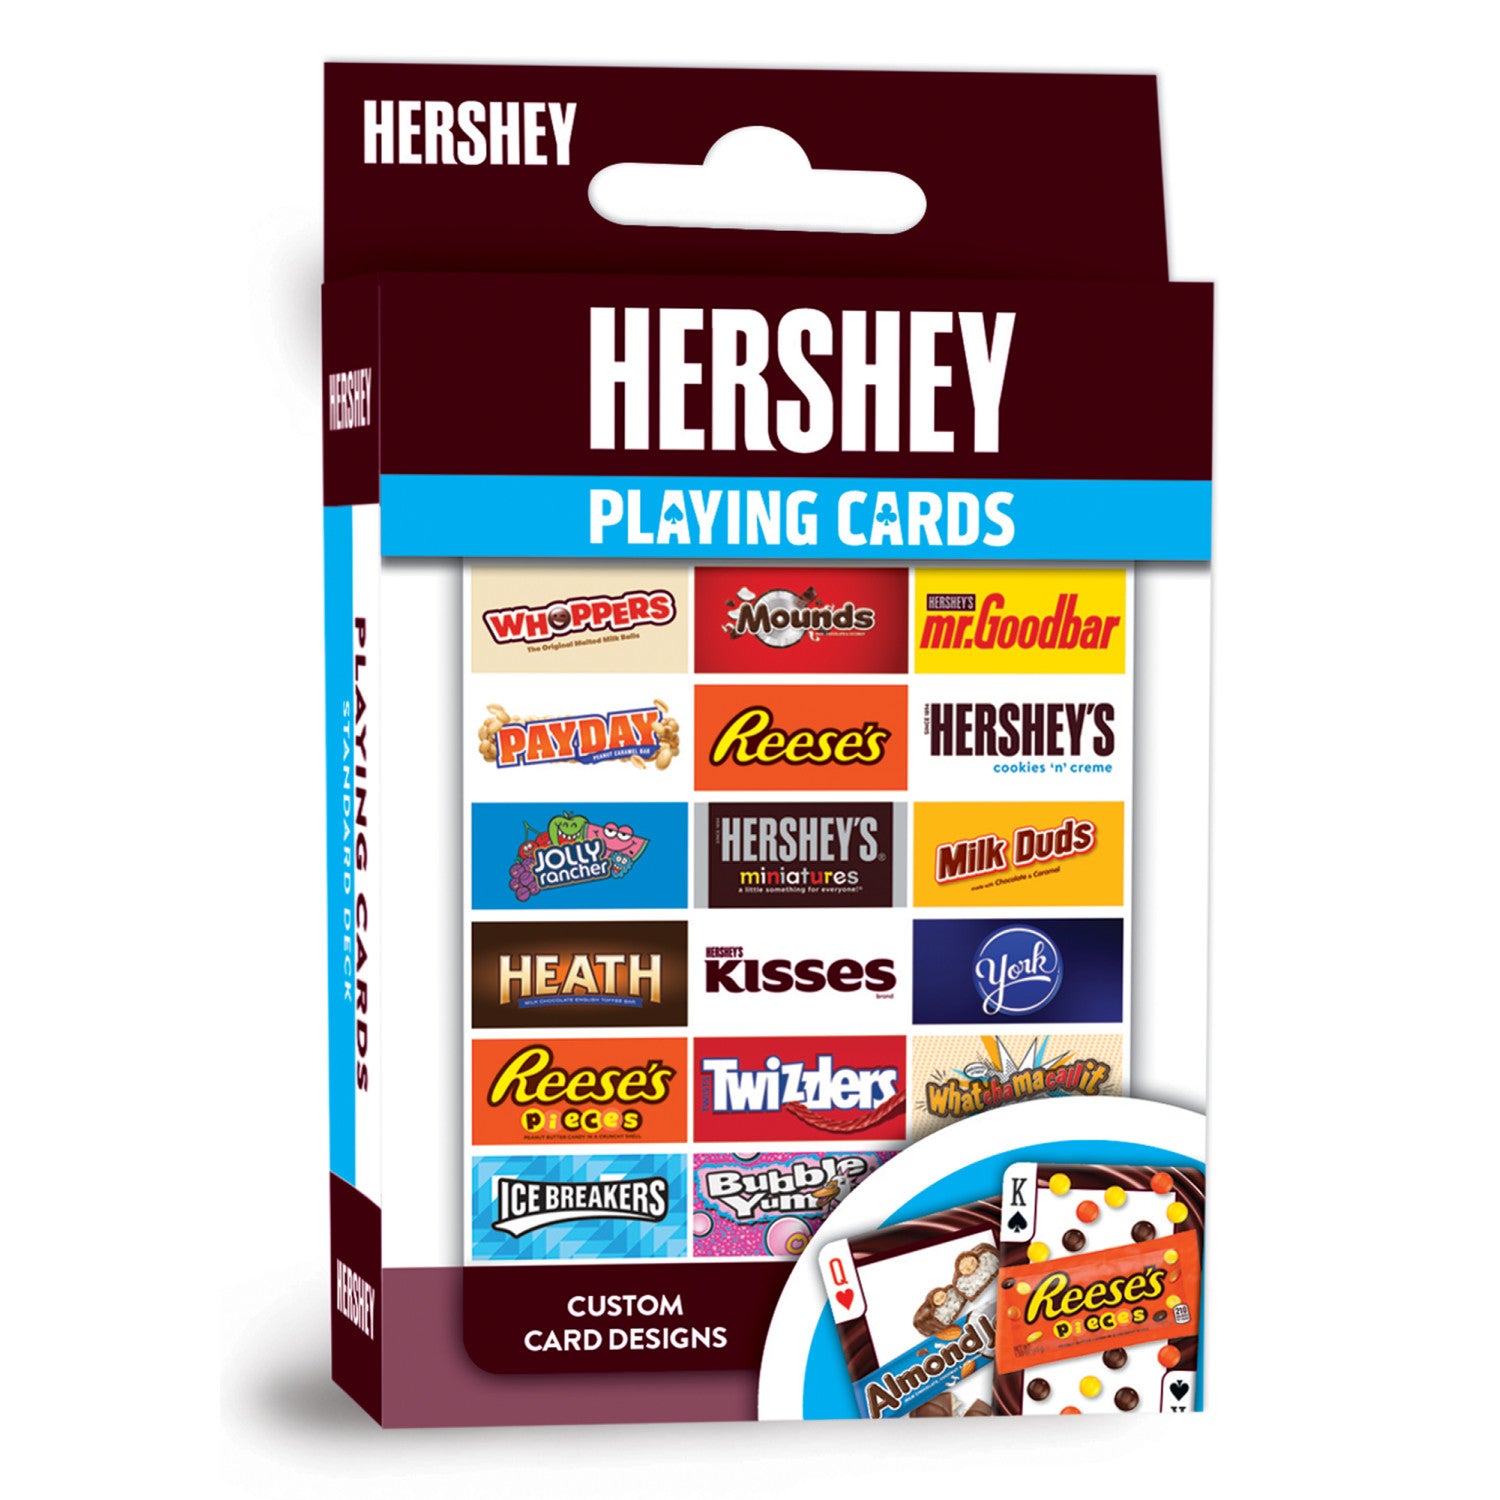 Hershey's Playing Cards - 54 Card Deck